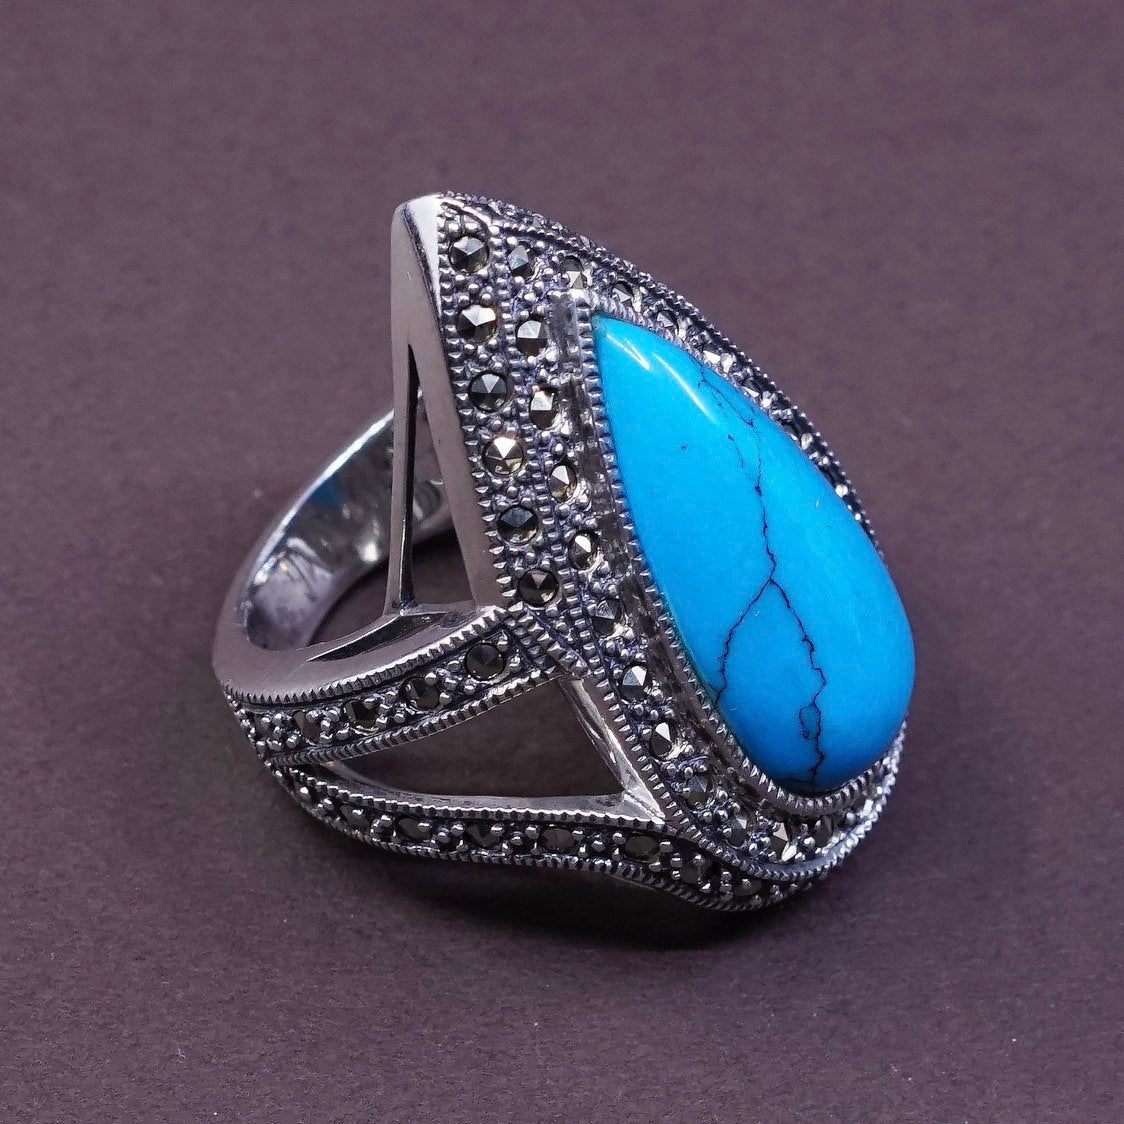 sz 7.25, Sterling silver handmade ring, 925 w/ teardrop turquoise and marcasite